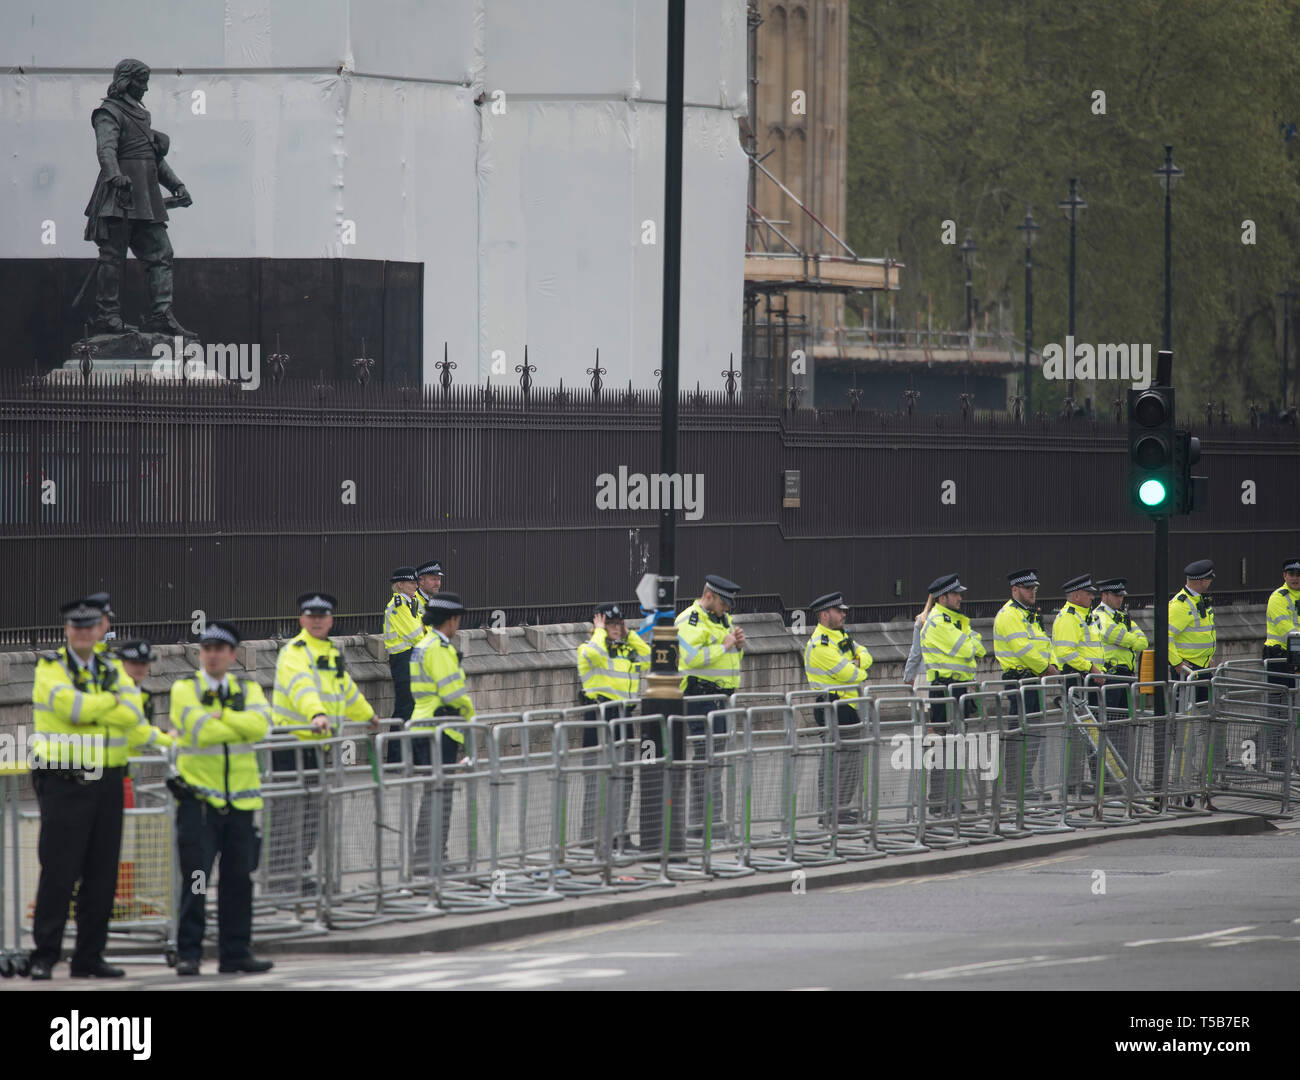 London, UK. 23rd Apr, 2019. Parliament Square and surrounding streets put in virtual lockdown with a large police presence as Extinction Rebellion climate change protesters march down Whitehall and into the Square. Image: Barriers and police cordon outside the Houses of Parliament. Credit: Malcolm Park/Alamy Live News Stock Photo